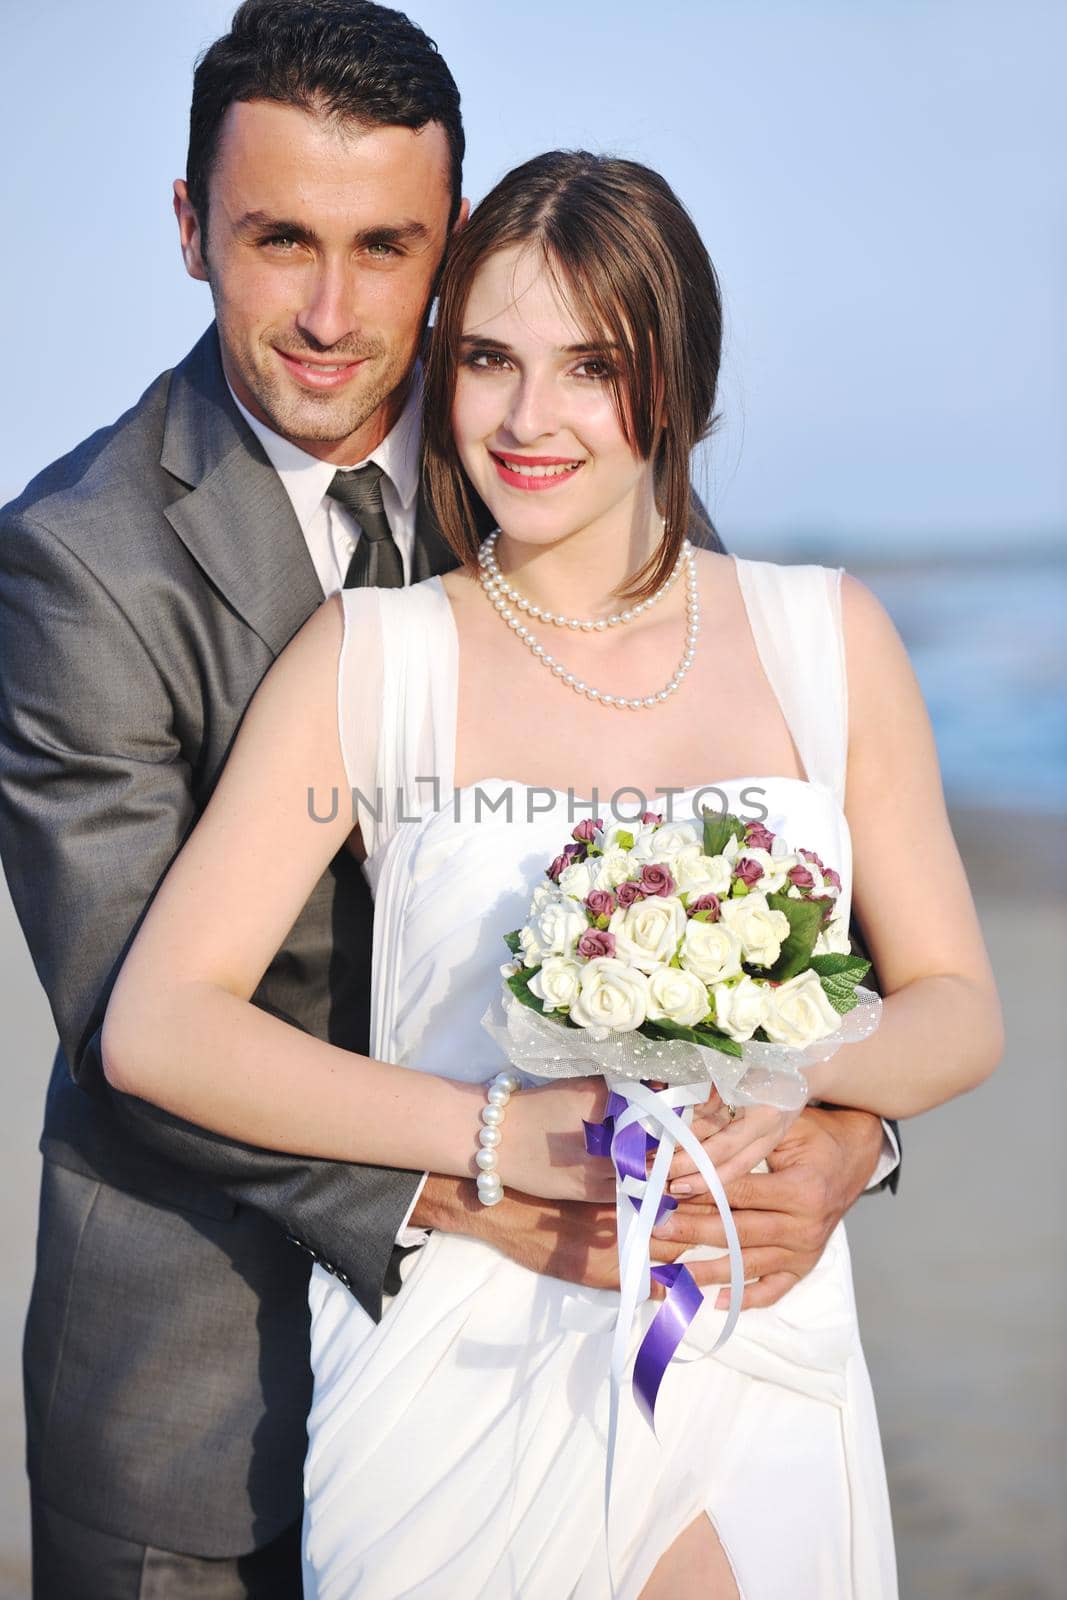 happy just married young couple celebrating and have fun at beautiful beach sunset